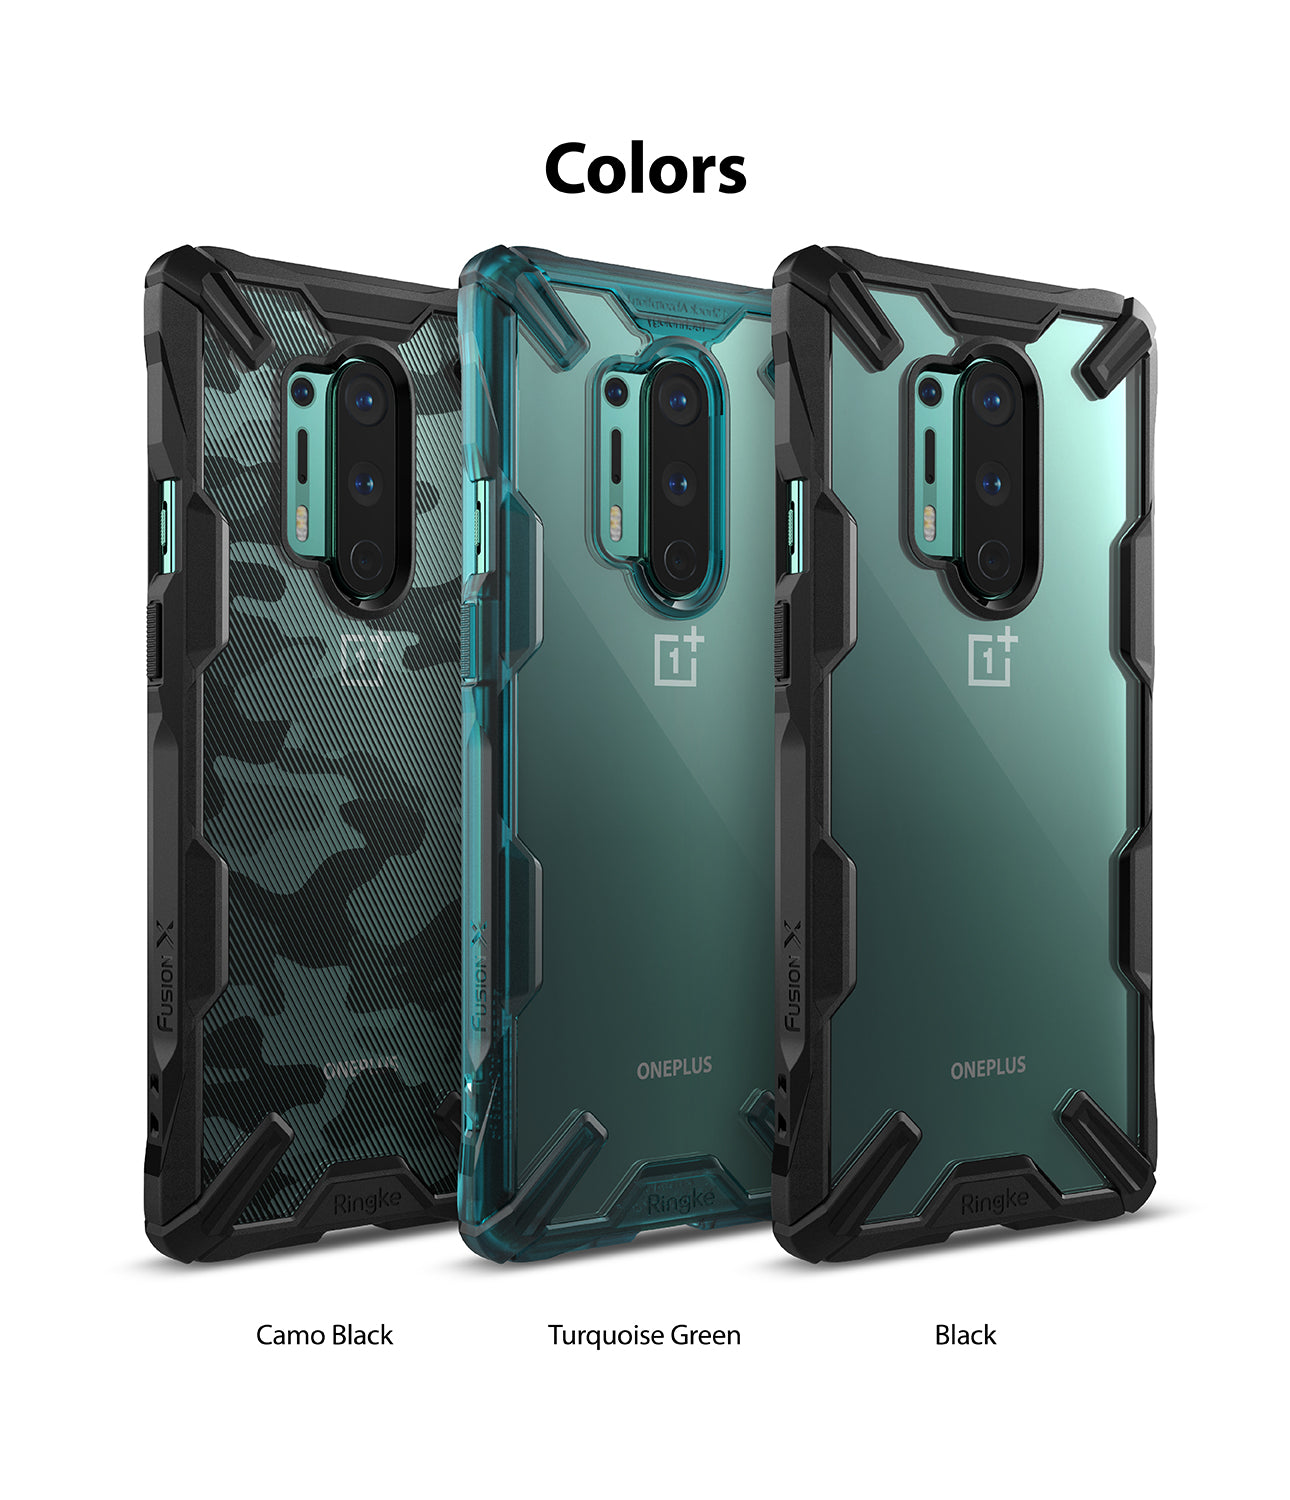 available in black, turquoise green, camo black